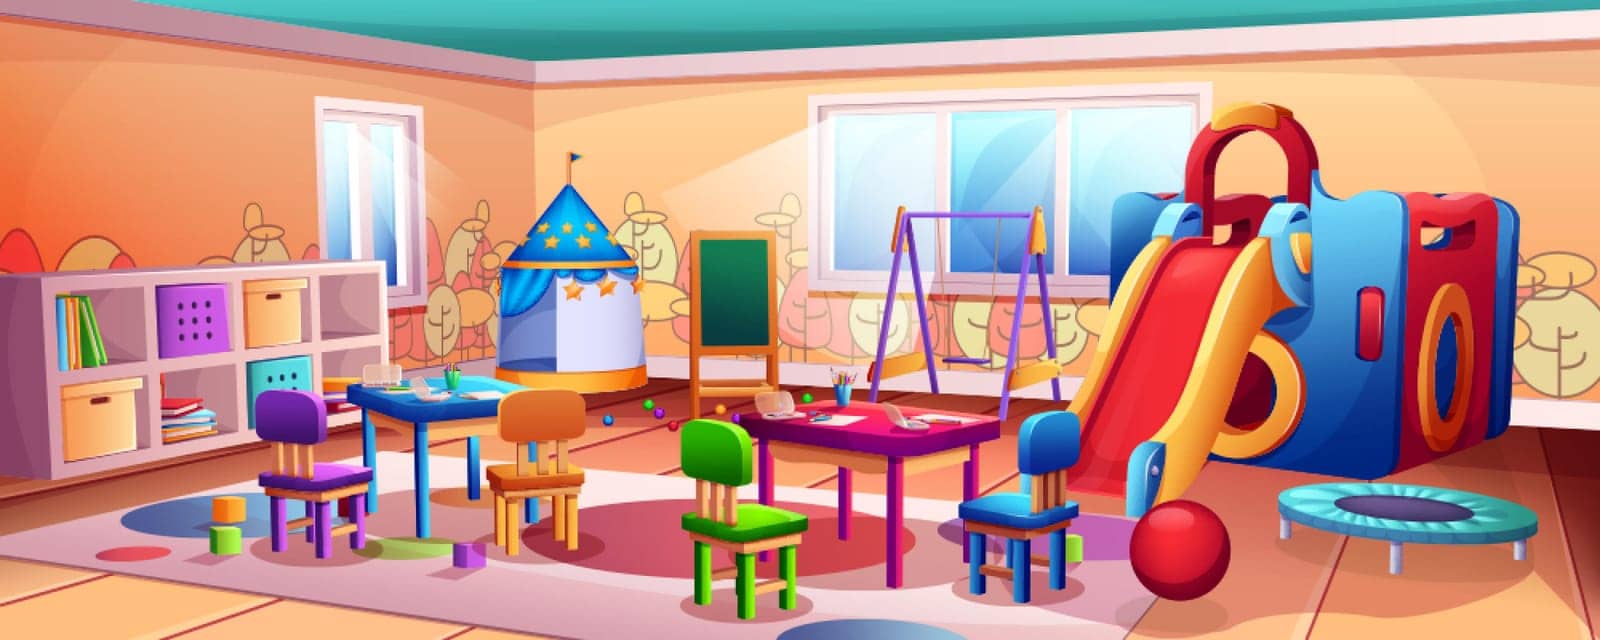 Cartoon kindergarten or preschool classroom interior. Empty kids room with slider, swing, trampoline and play area. Child playroom with toys, tables and chairs, painting board and pencils for drawing.